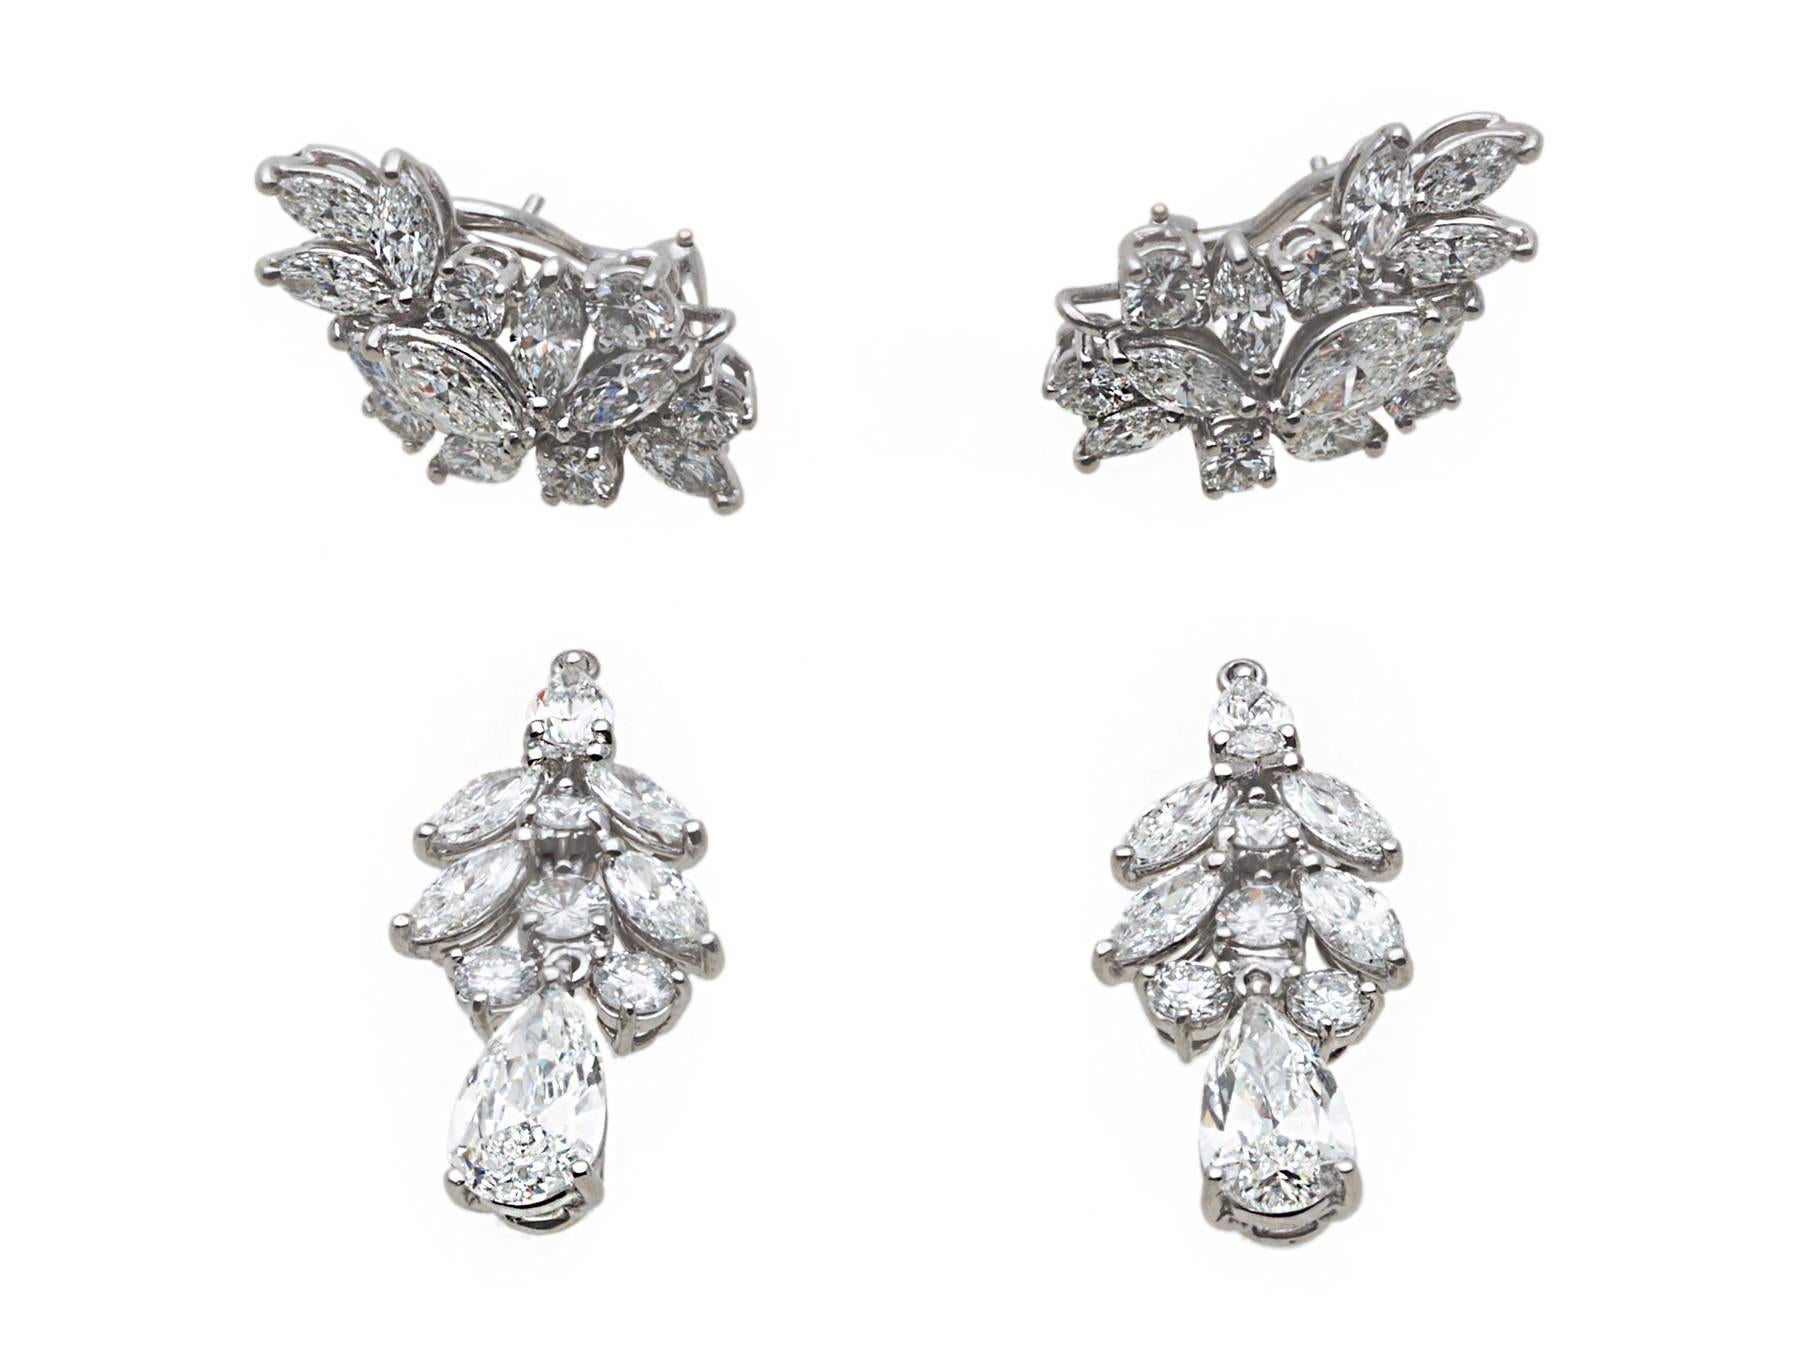 Diamond Earrings made of 18K White Gold. Total Diamond Weight 19.00 carat, the bottom pear shape are 1.36 carat and 1.39 carat.The bottom part is detachable. The earrings are 2 inches long. 